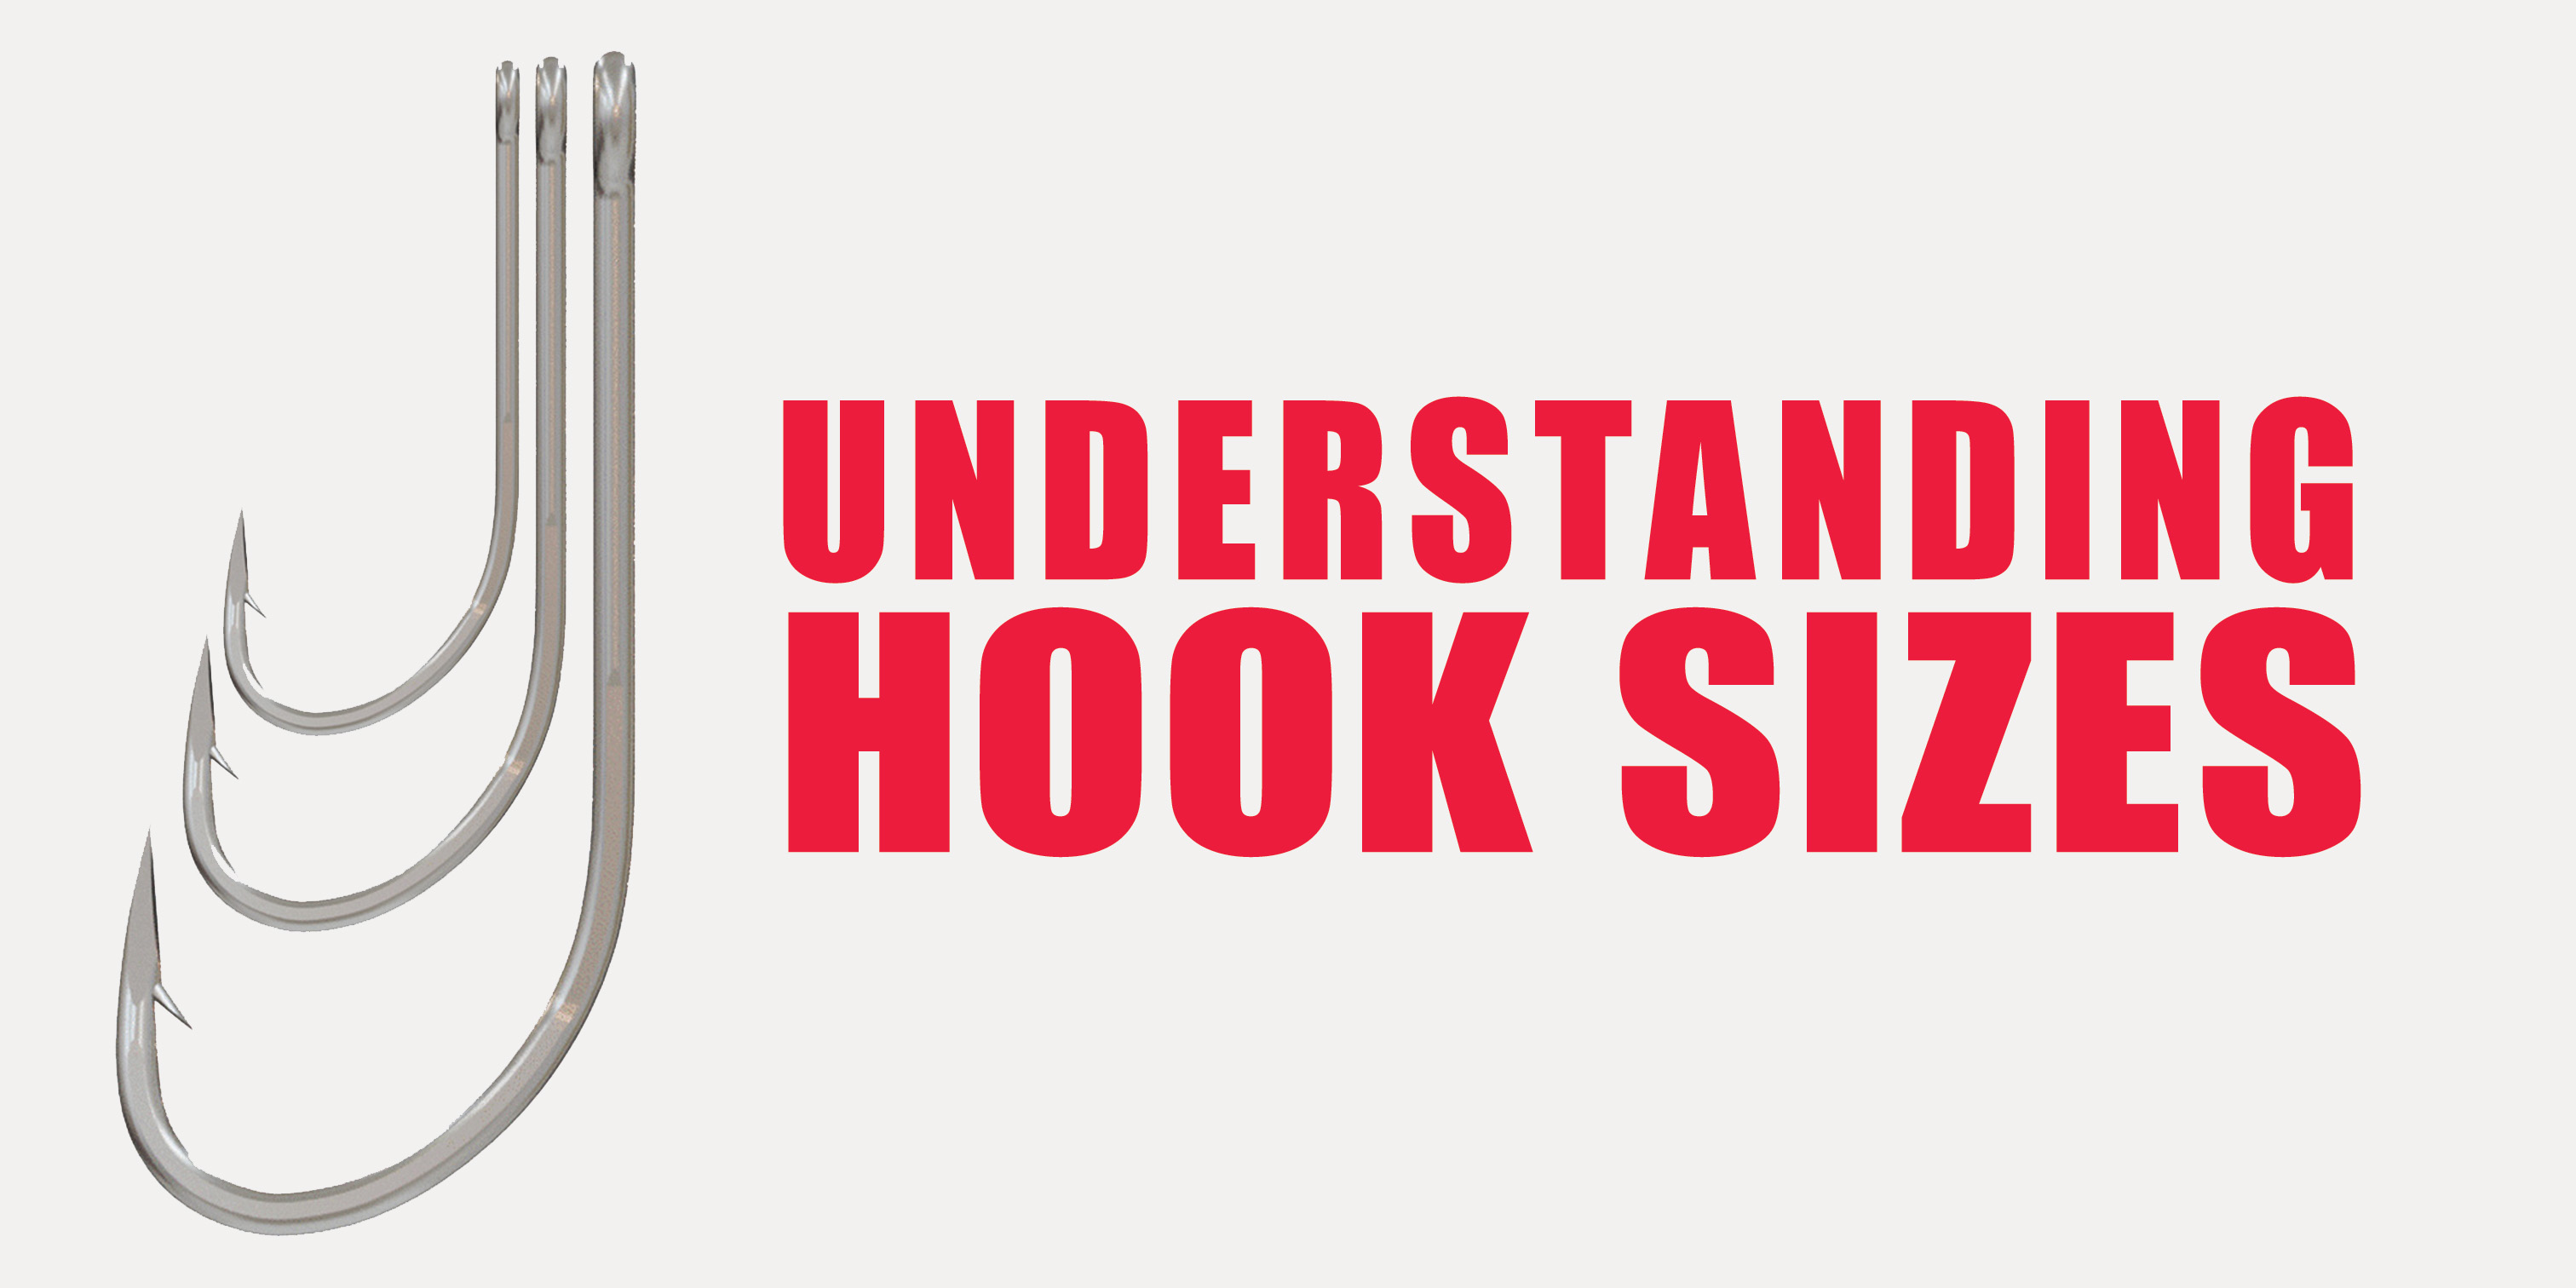 Shape and dimensions of each type of hook (numbers 9, 9.5, 10 and